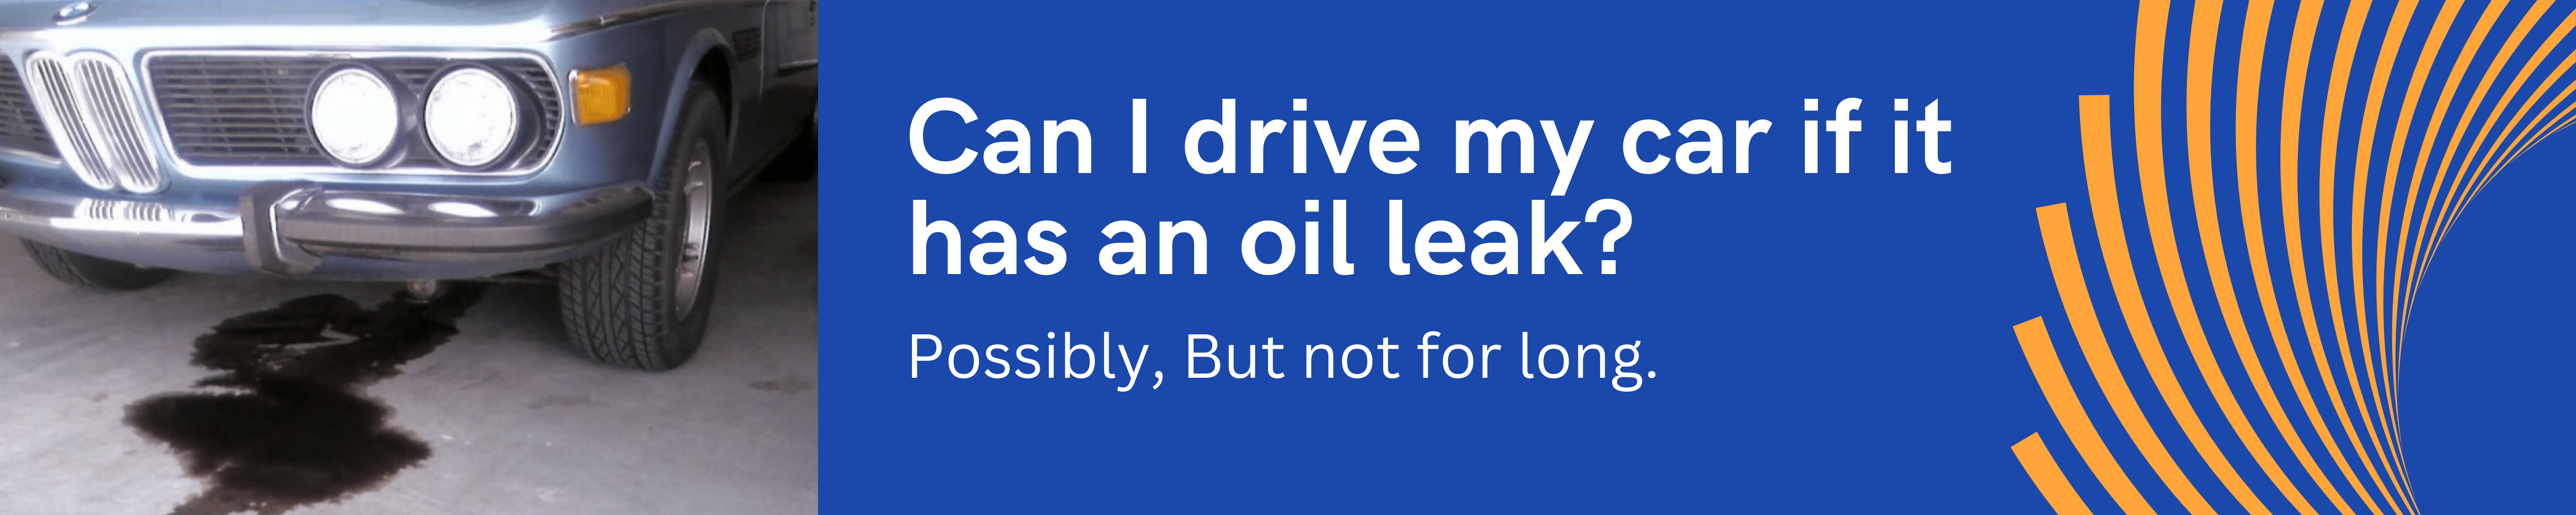 Can I Drive My Car If It Has An Oil Leak?